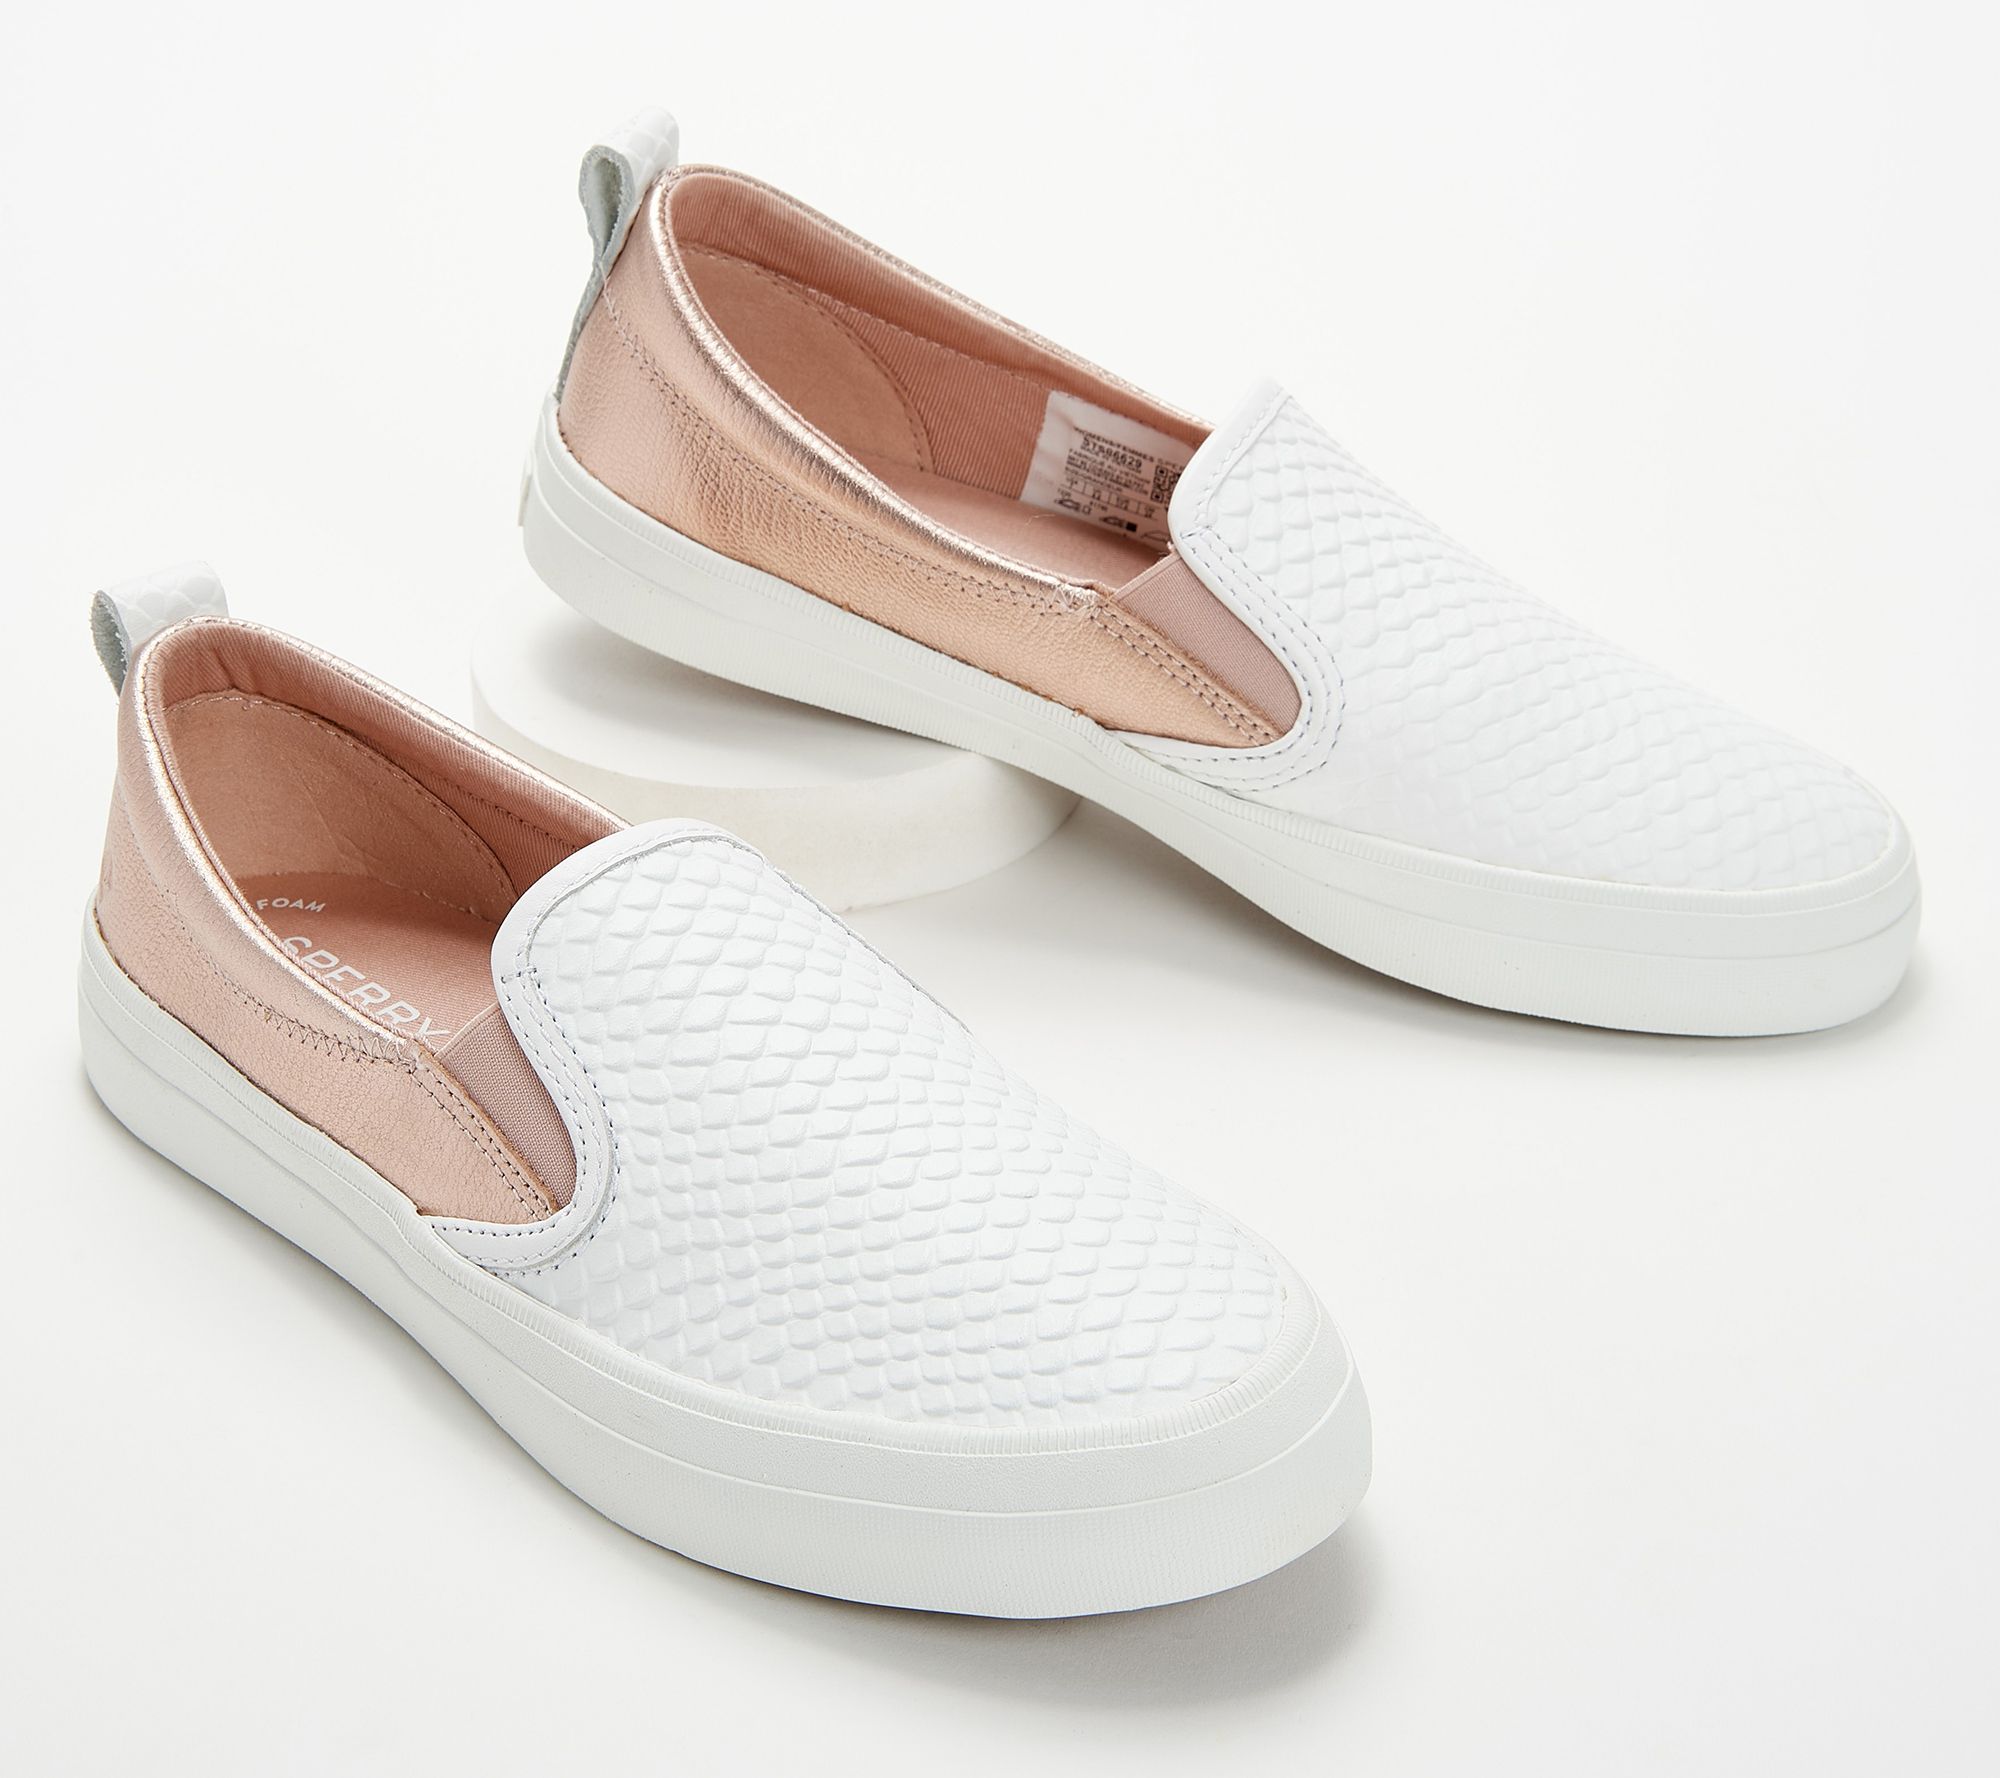 Sperry Leather Crest Twin-Gore Slip-On Shoes - QVC.com